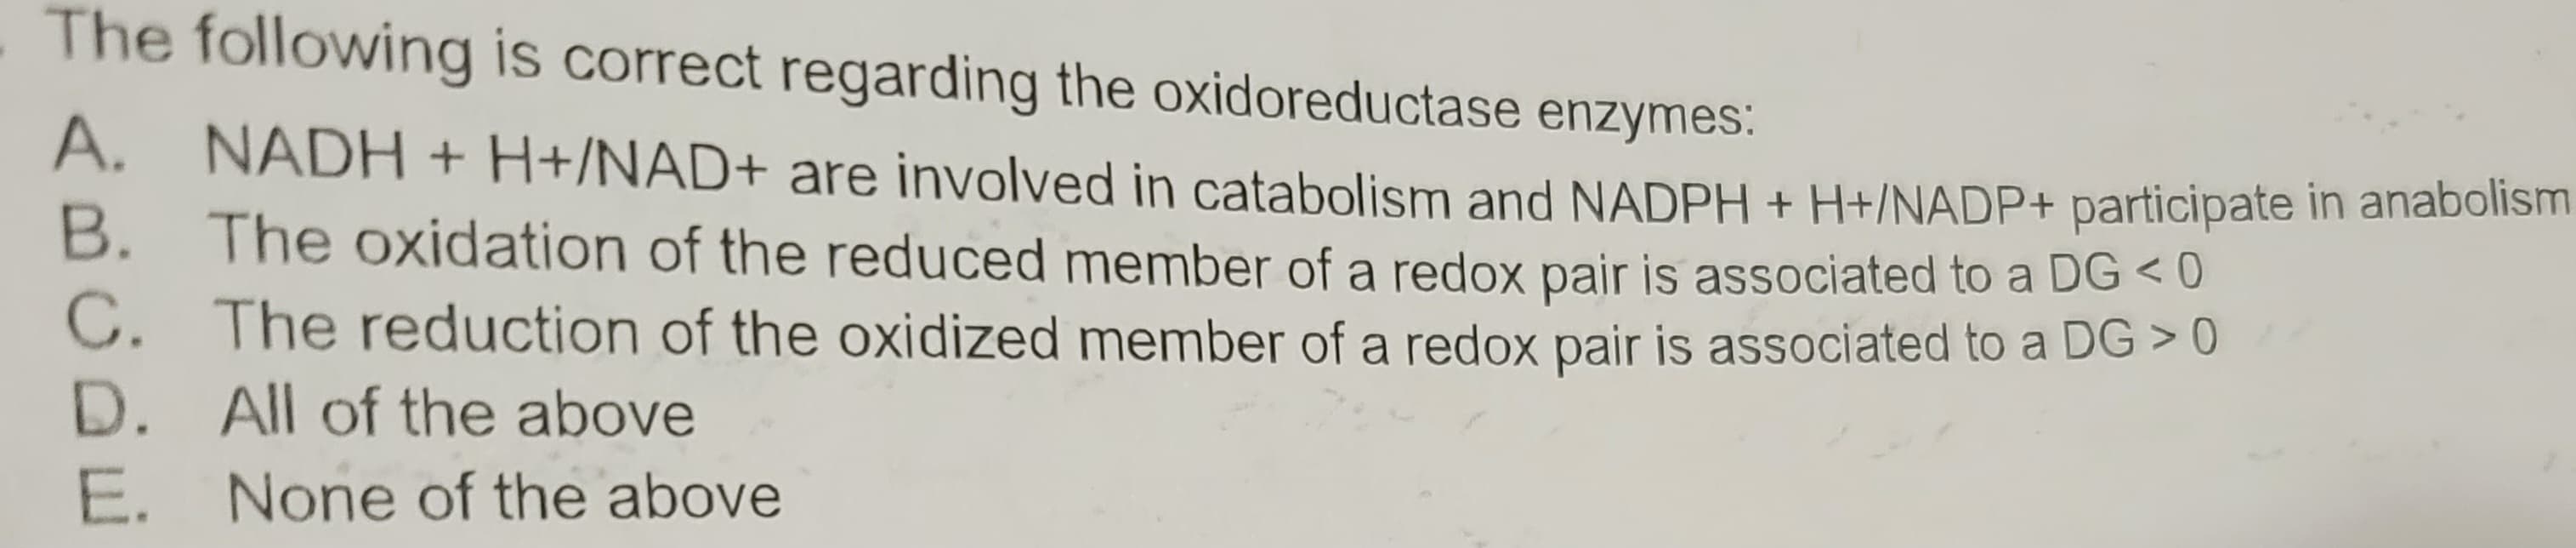 The following is correct regarding the oxidoreductase enzymes:
A. NADH + H+/NAD+ are involved in catabolism and NADPH + H+/NADP+ participate in anabolism
B. The oxidation of the reduced member of a redox pair is associated to a DG < 0
C. The reduction of the oxidized member of a redox pair is associated to a DG > 0
D. All of the above
E. None of the above